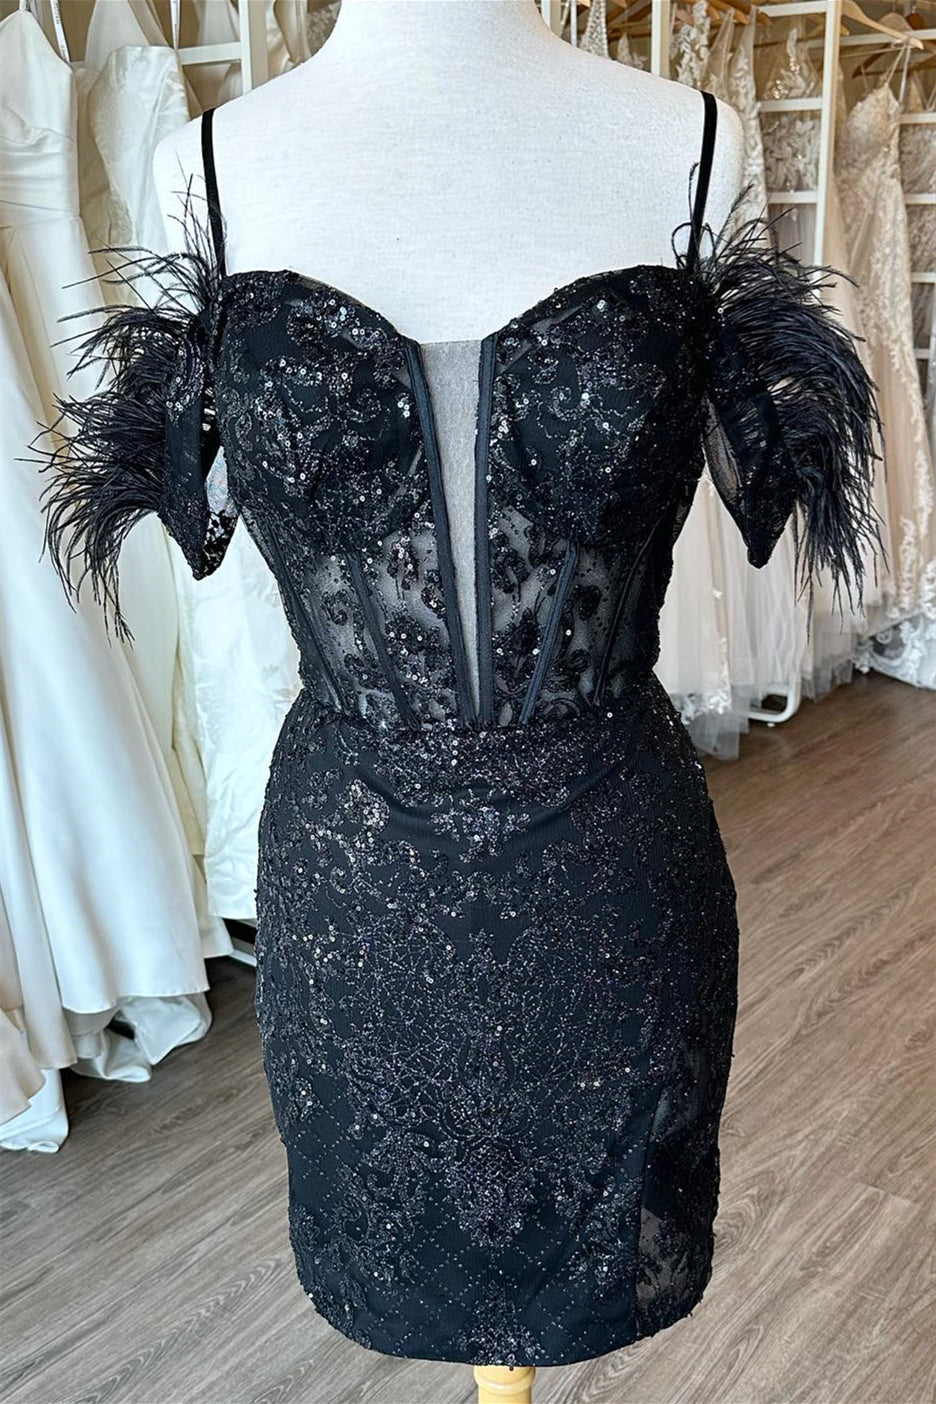 Prom Dresses Suits Ideas, Black Off-the-Shoulder Sequined Embroidery Sheath Homecoming Dress with Feathers